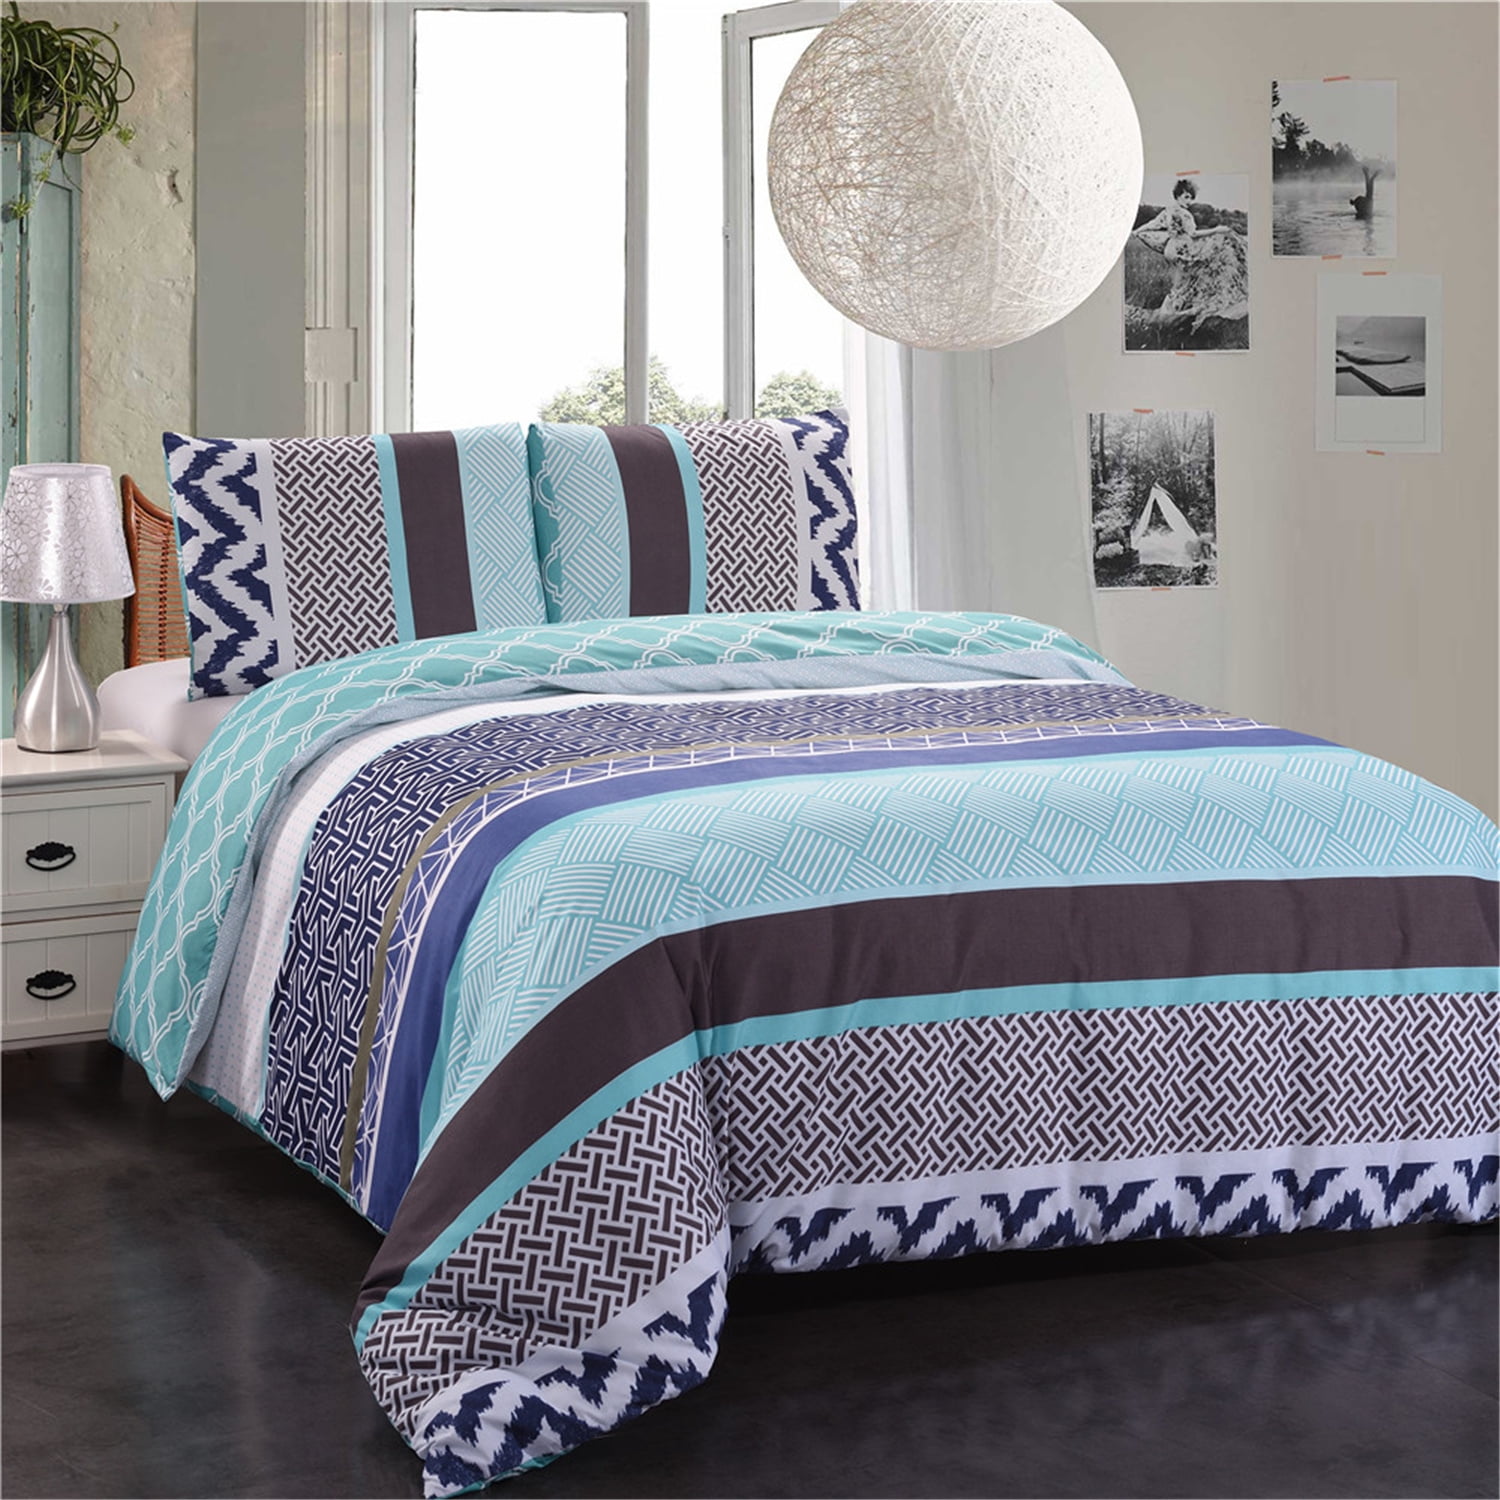 DUVET COVER KING SIZE WITH PILLOWCASE Soft Bedding Set Reversible Quilt Covers 